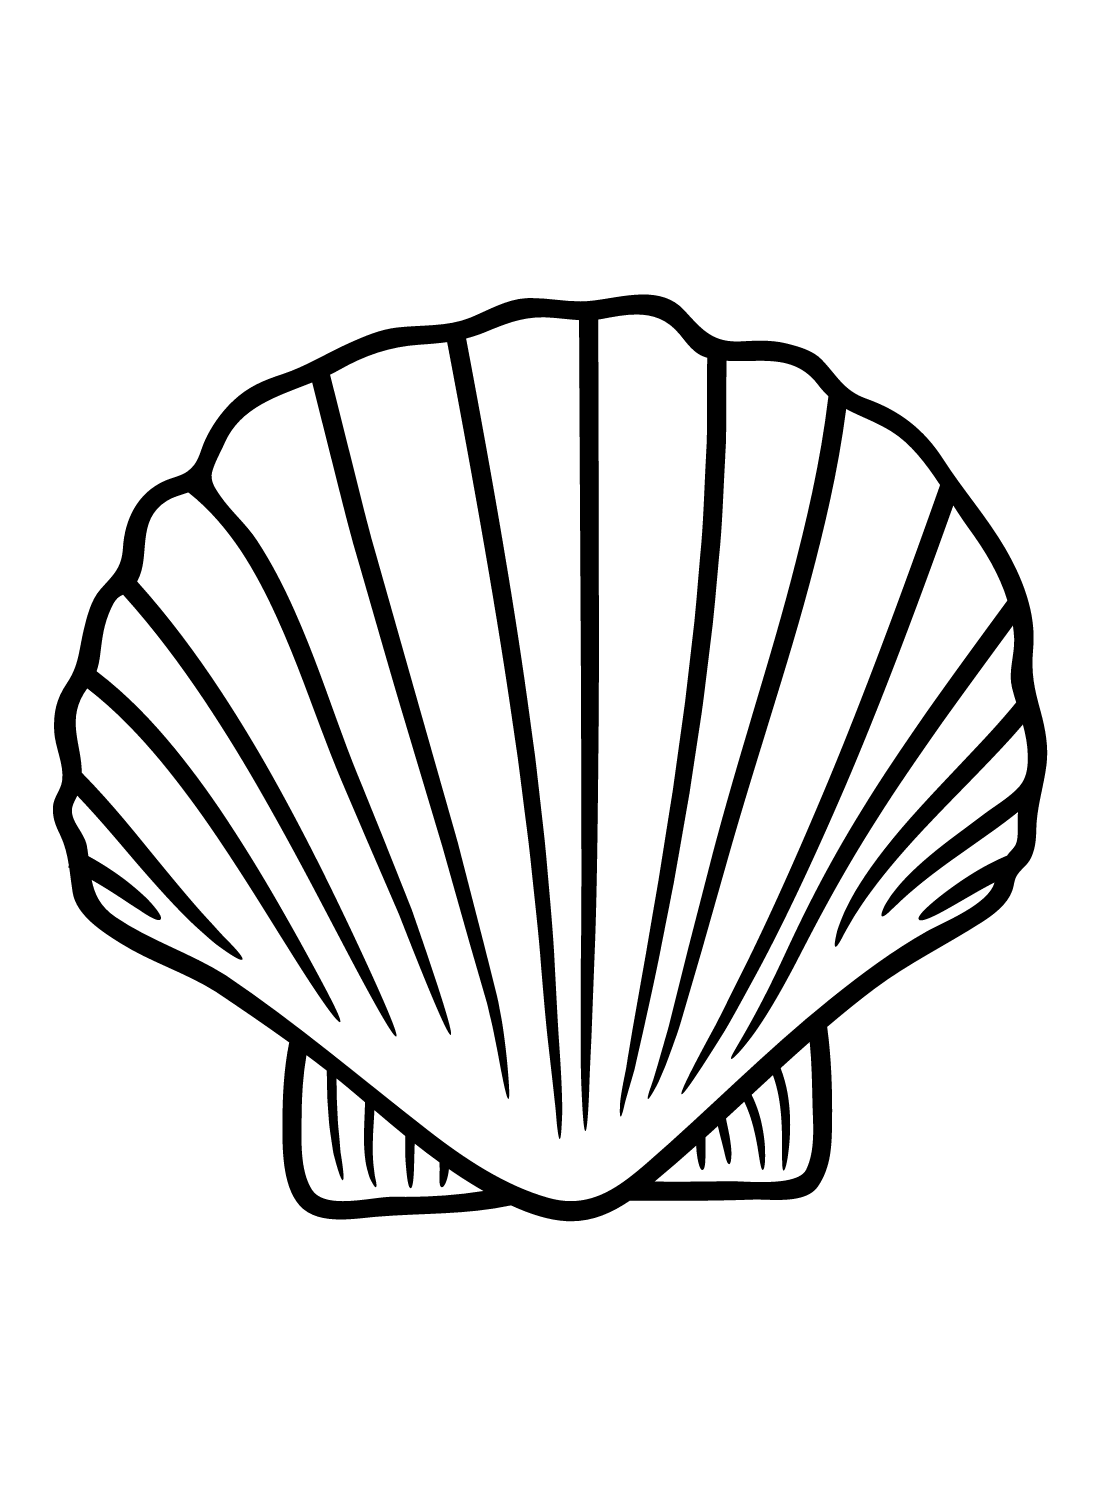 Scallop coloring pages printable for free download